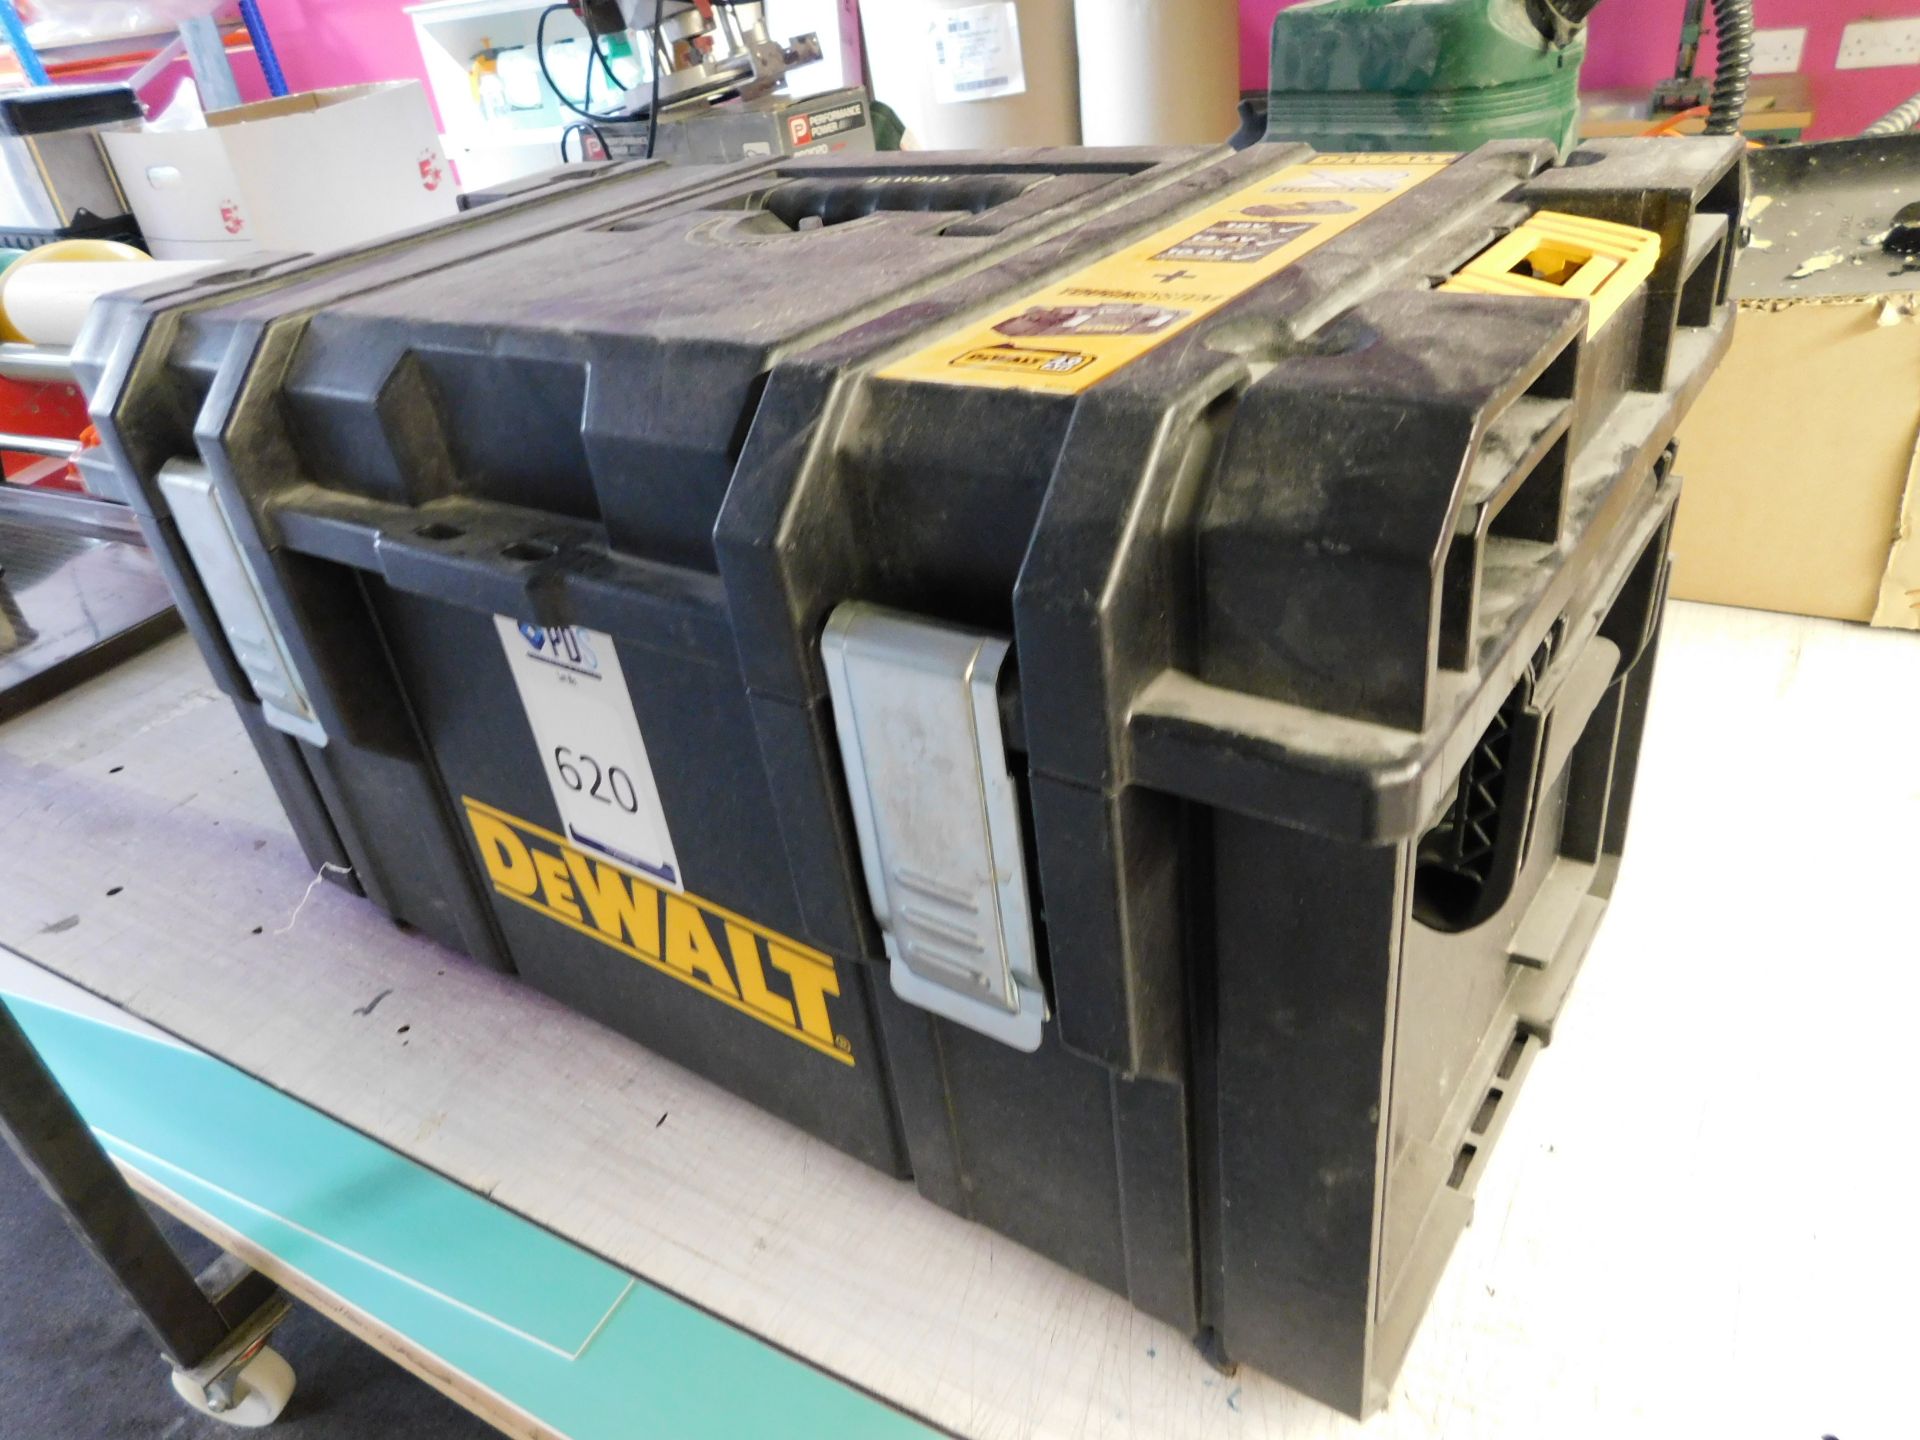 DeWalt 18v Cordless Drill, 2 Batteries, Charger & Carry Case (on mezzanine) (Location Rochdale. - Image 8 of 8